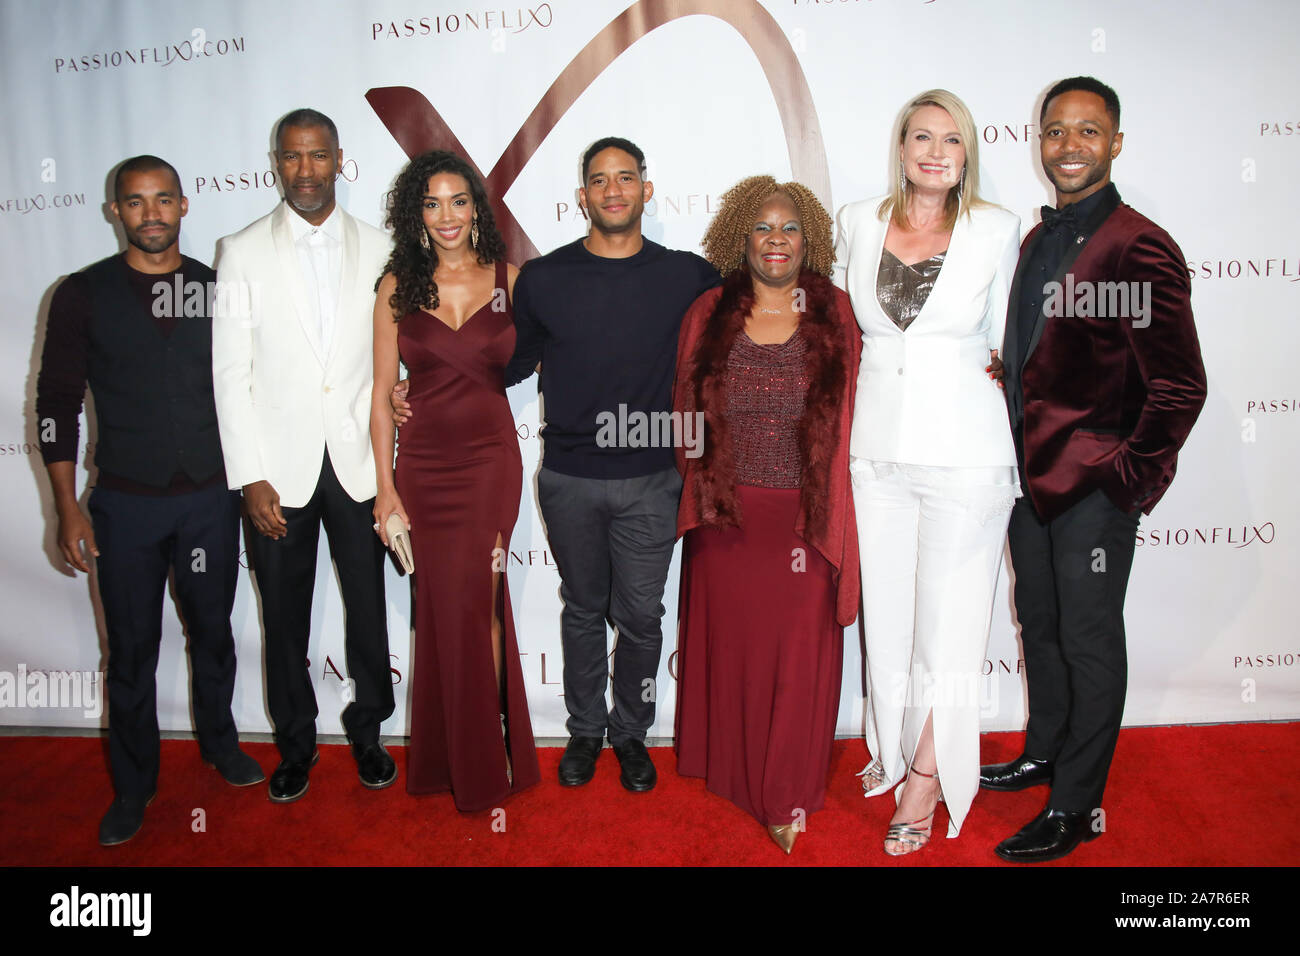 Passionflix's 'A Brother's Honor' Premiere at Raleigh Studios in Los Angeles, California on October 3 Featuring: Michael Marcel, Ricco Ross, Celestine Rae, Jeremy Batiste, Brenda Jackson, Tosca Musk, Thomas Hobson Where: Los Angeles, California, United States When: 04 Oct 2019 Credit: Sheri Determan/WENN.com Stock Photo